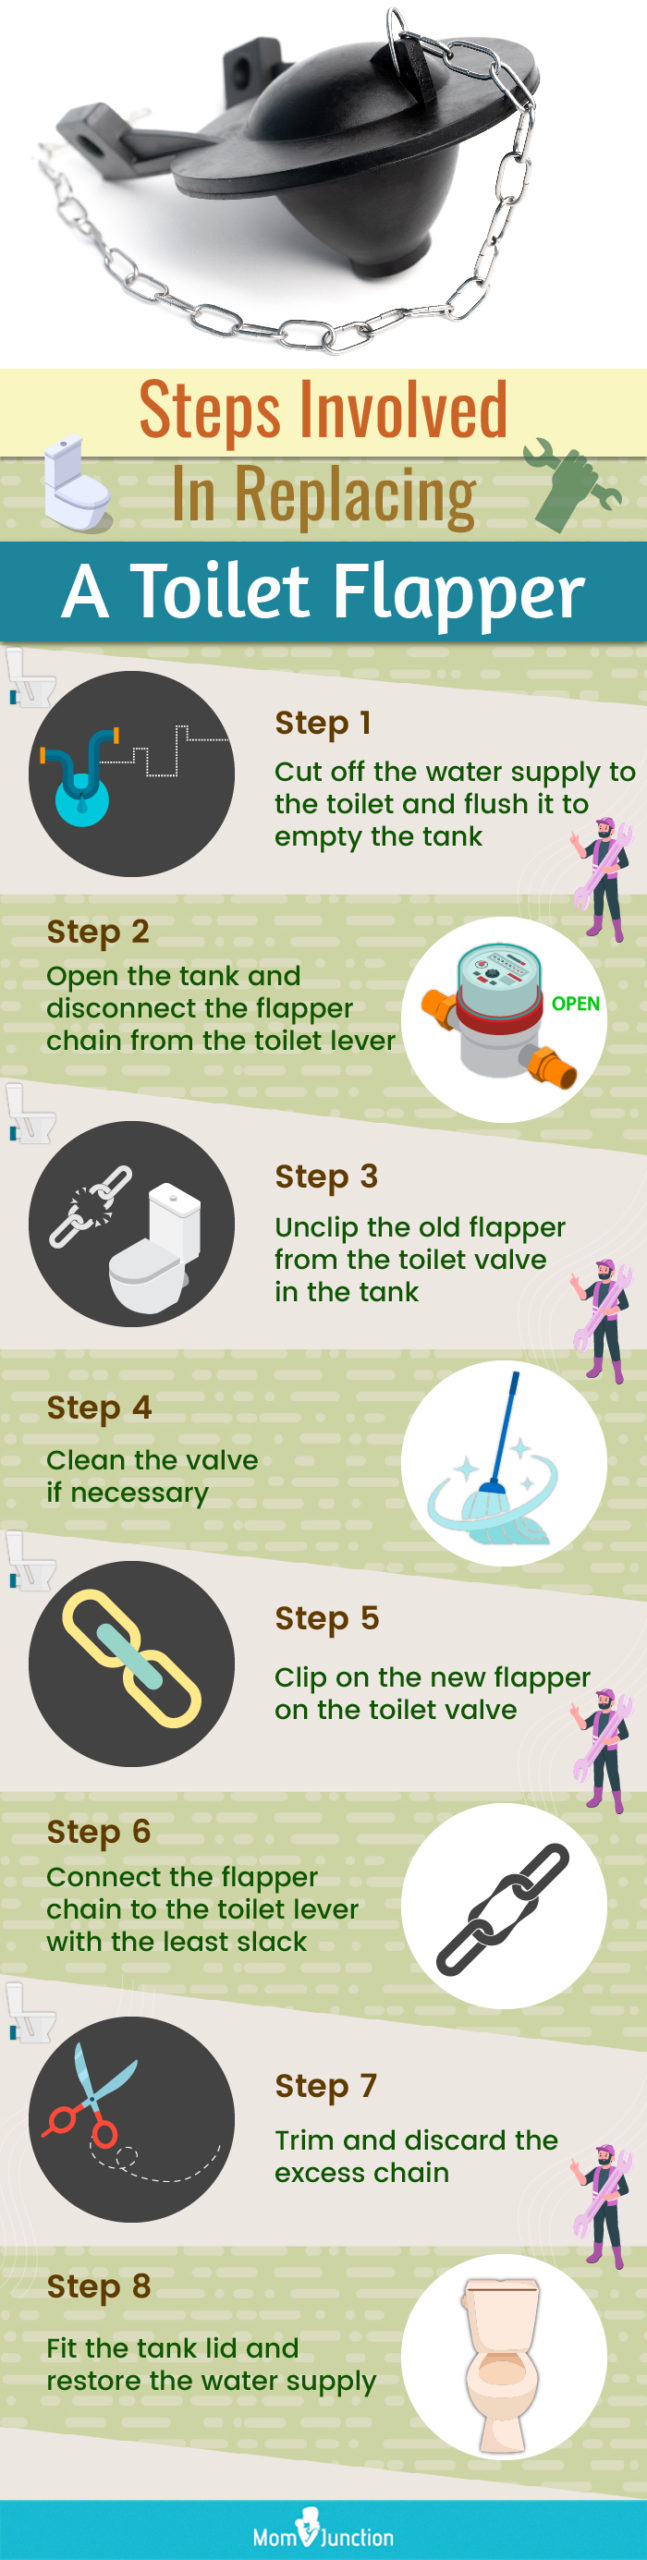 Steps Involved In Replacing A Toilet Flapper (infographic)